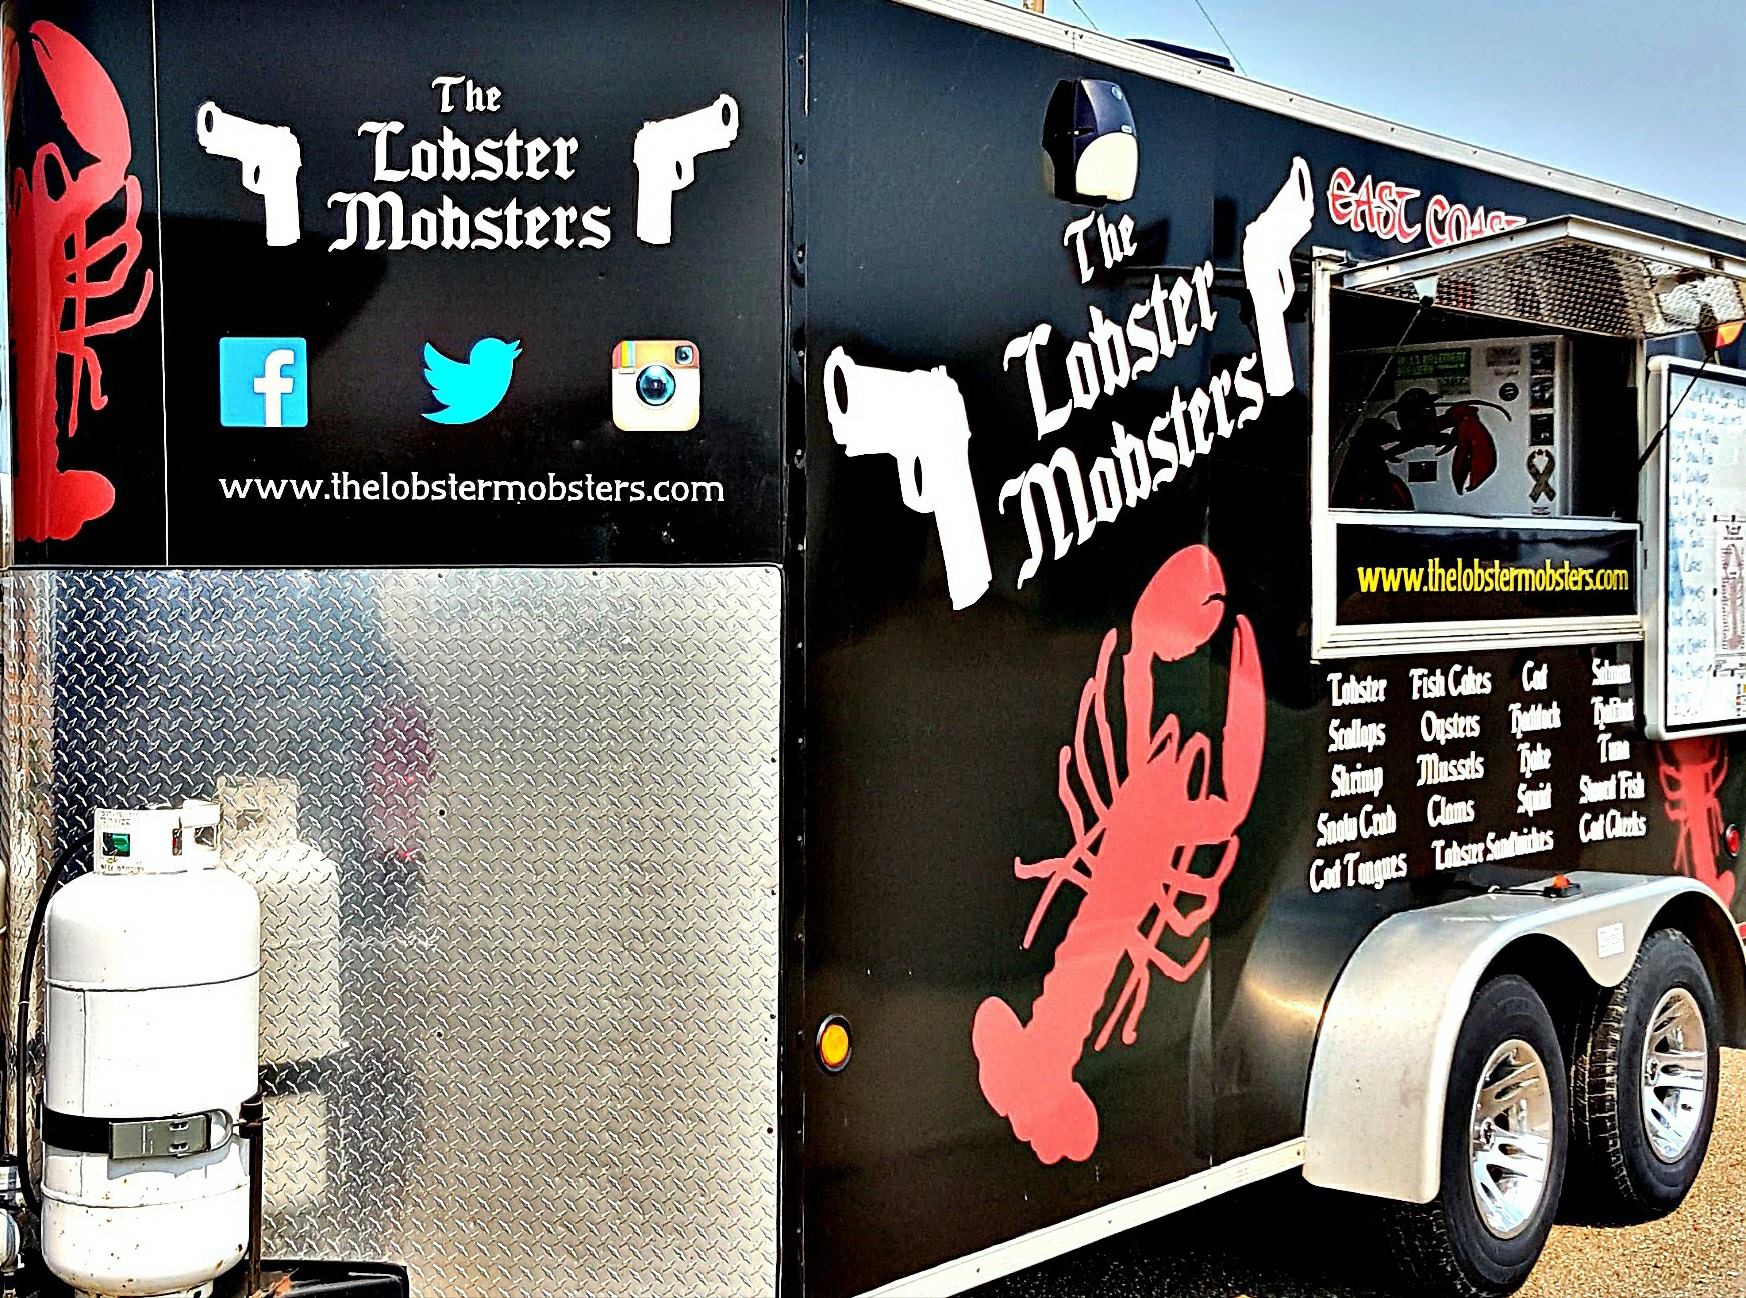 thelobstermobsters.com